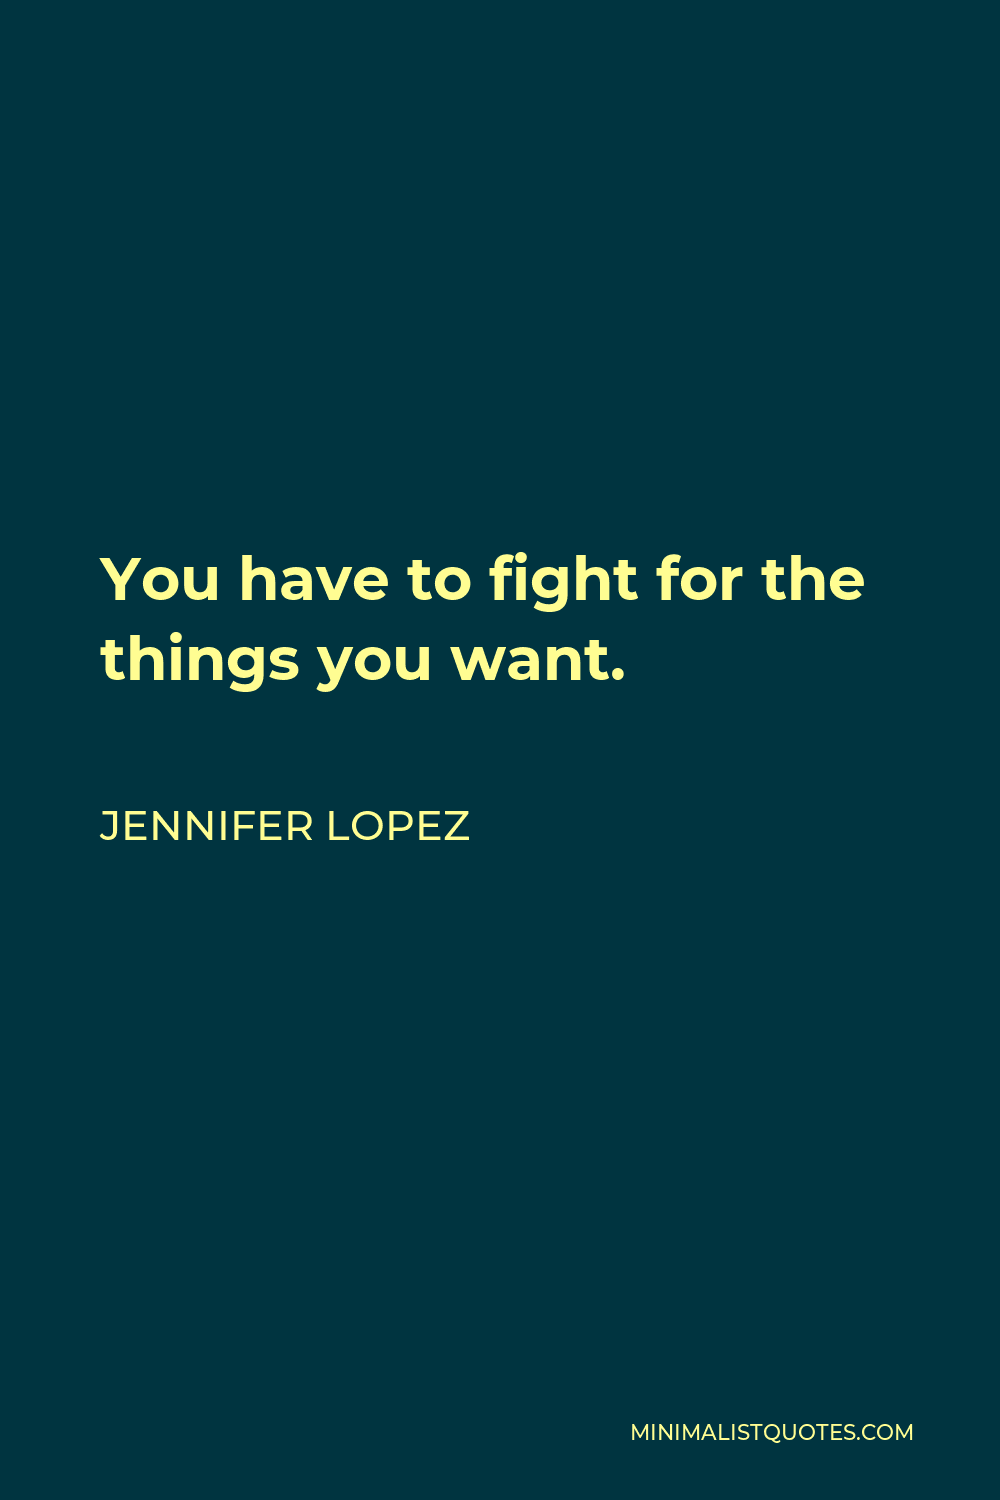 Jennifer Lopez Quote - You have to fight for the things you want.